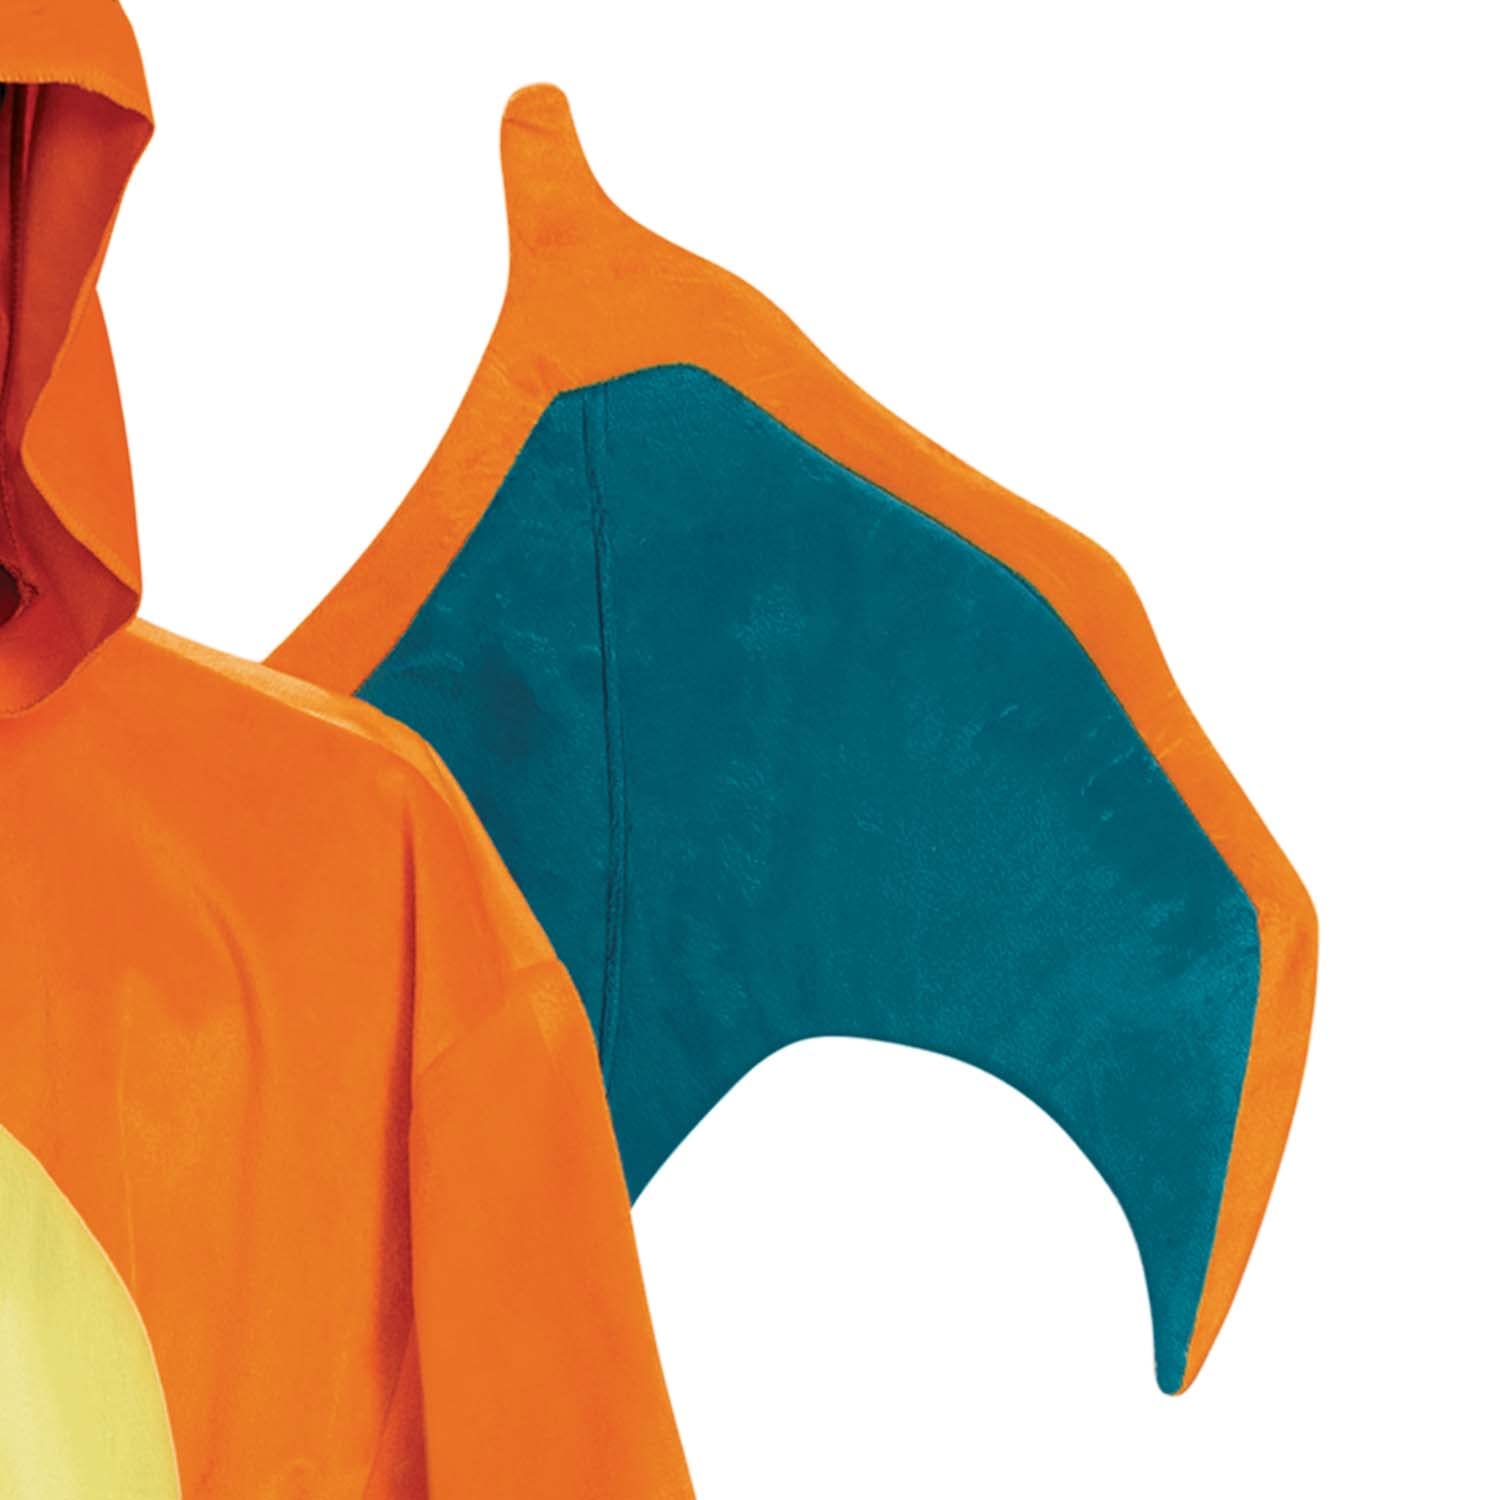 Disguise unisex-adult Charizard Costume for Adults, Deluxe Official Pokemon Halloween Costume With Hood and Wings